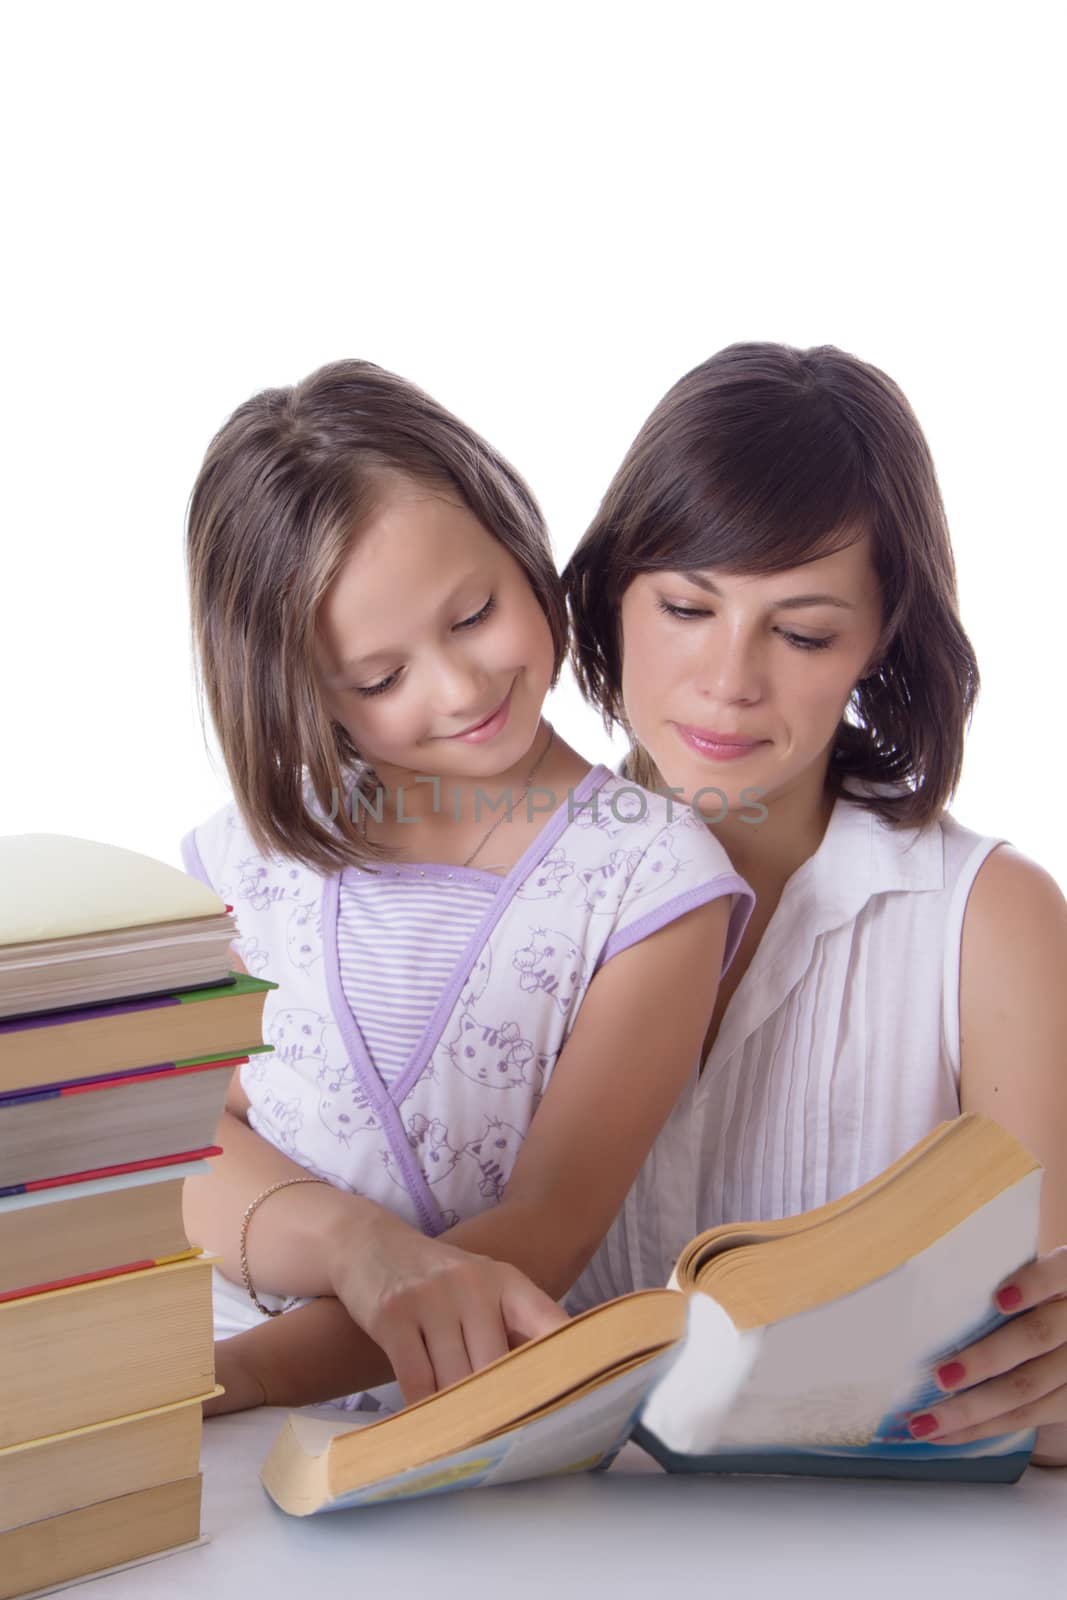 Mother and daughter reading books by Angel_a